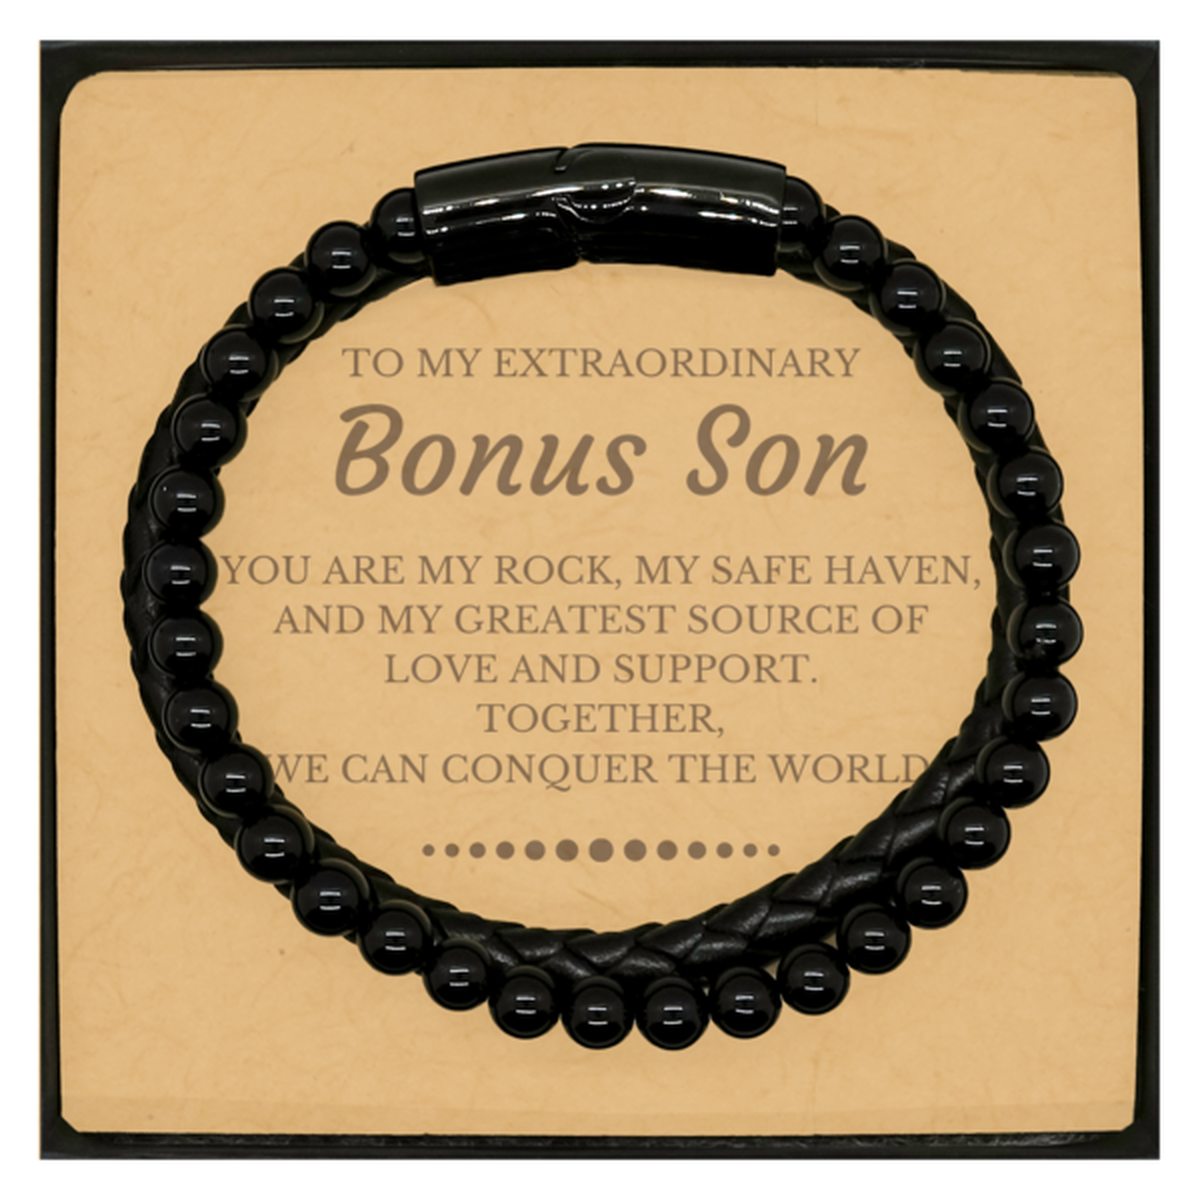 To My Extraordinary Bonus Son Gifts, Together, we can conquer the world, Birthday Christmas Stone Leather Bracelets For Bonus Son, Christmas Gifts For Bonus Son